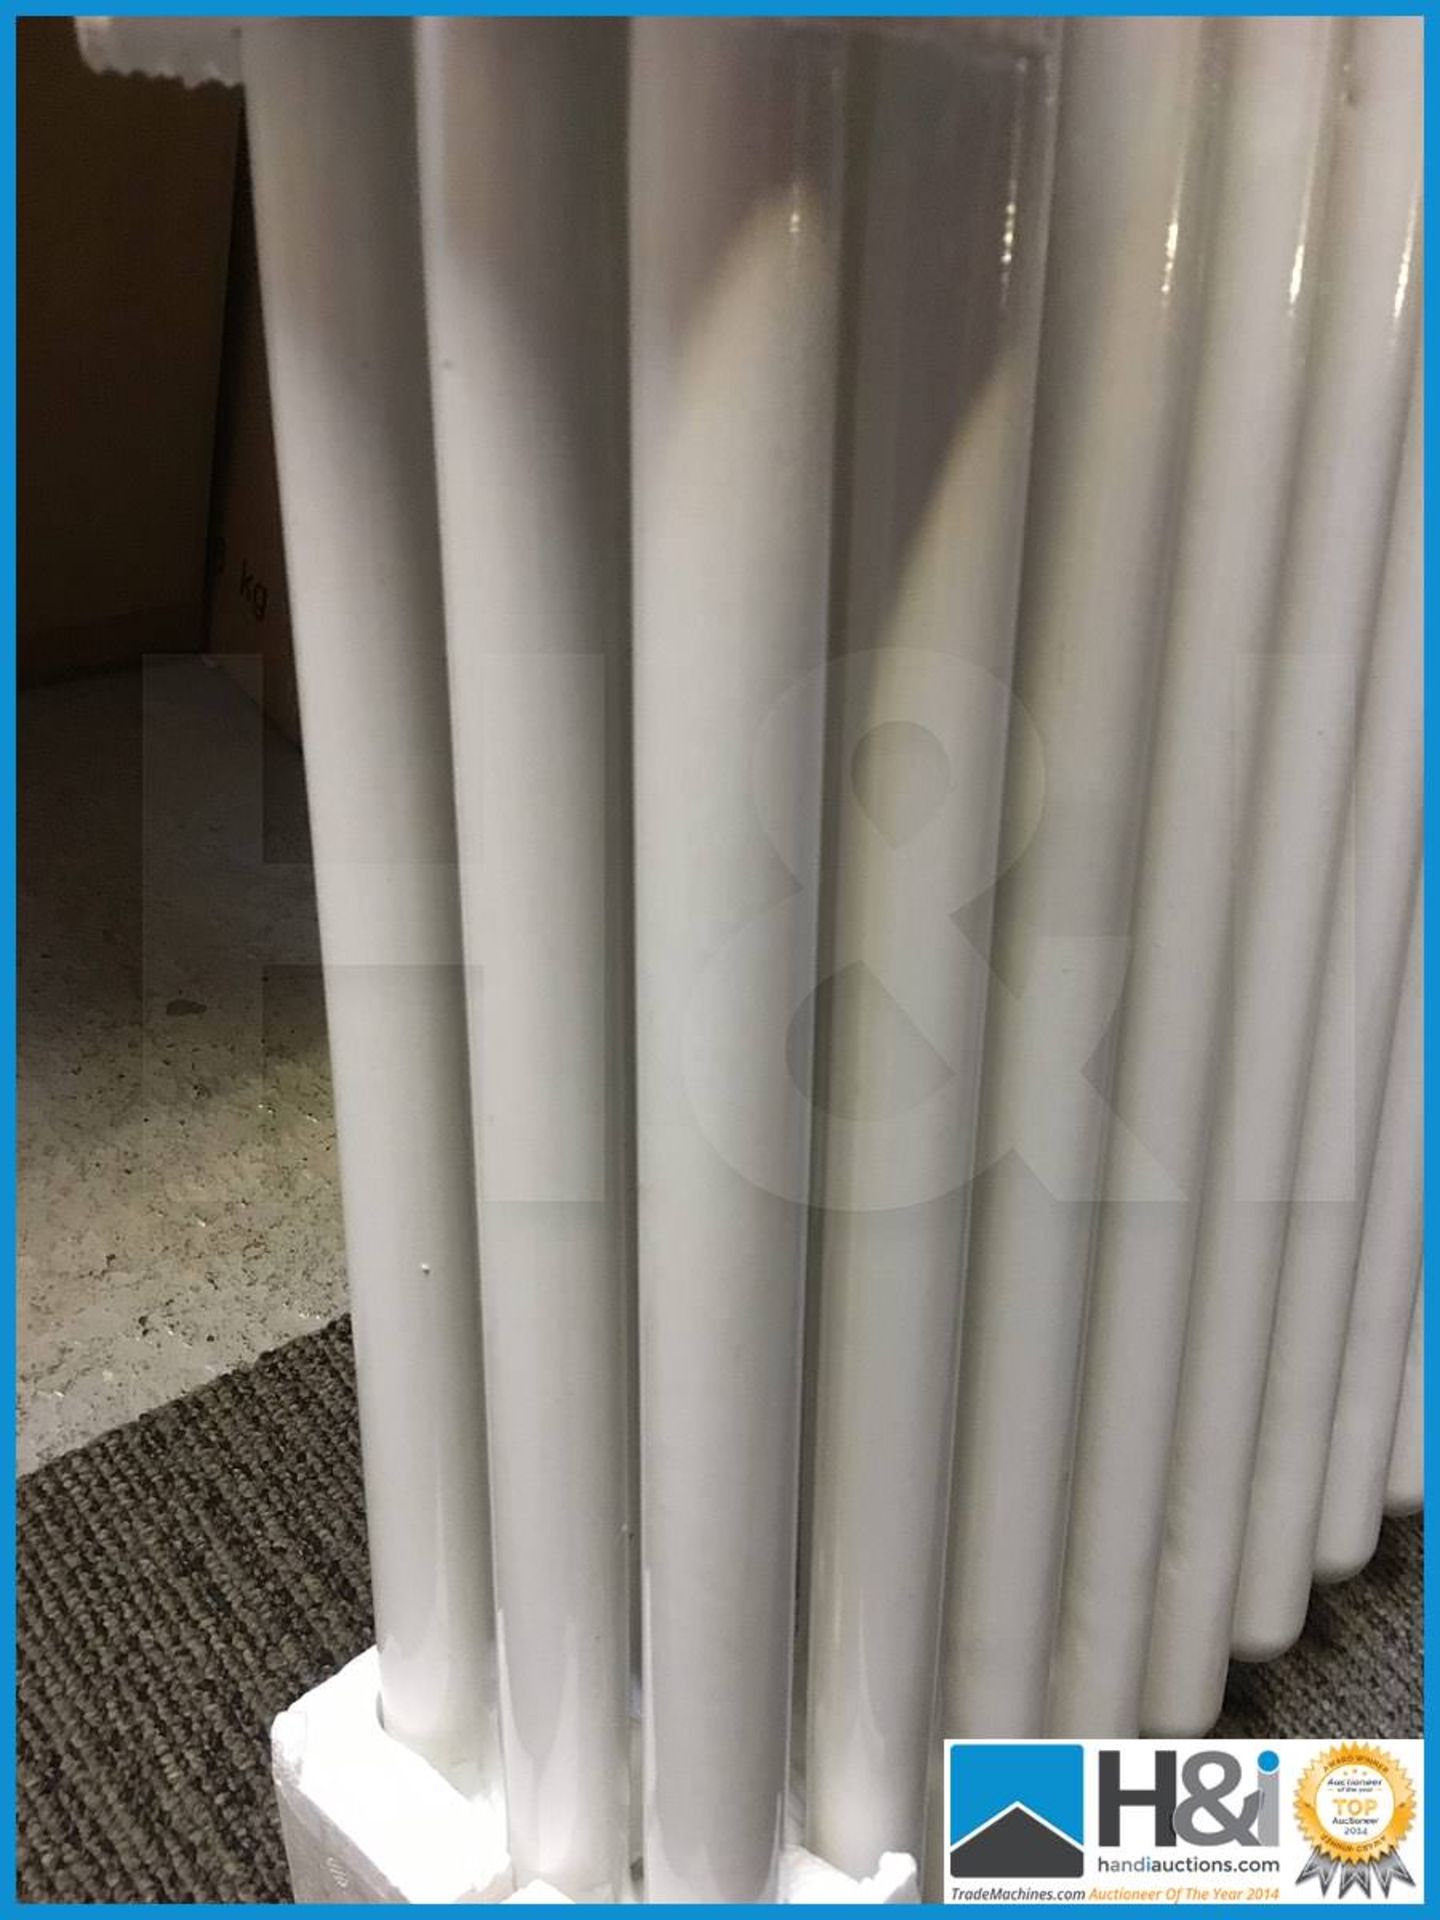 Stunning designer traditional style 3 column radiator in white finish. 750x600. Includes end caps - Image 2 of 4